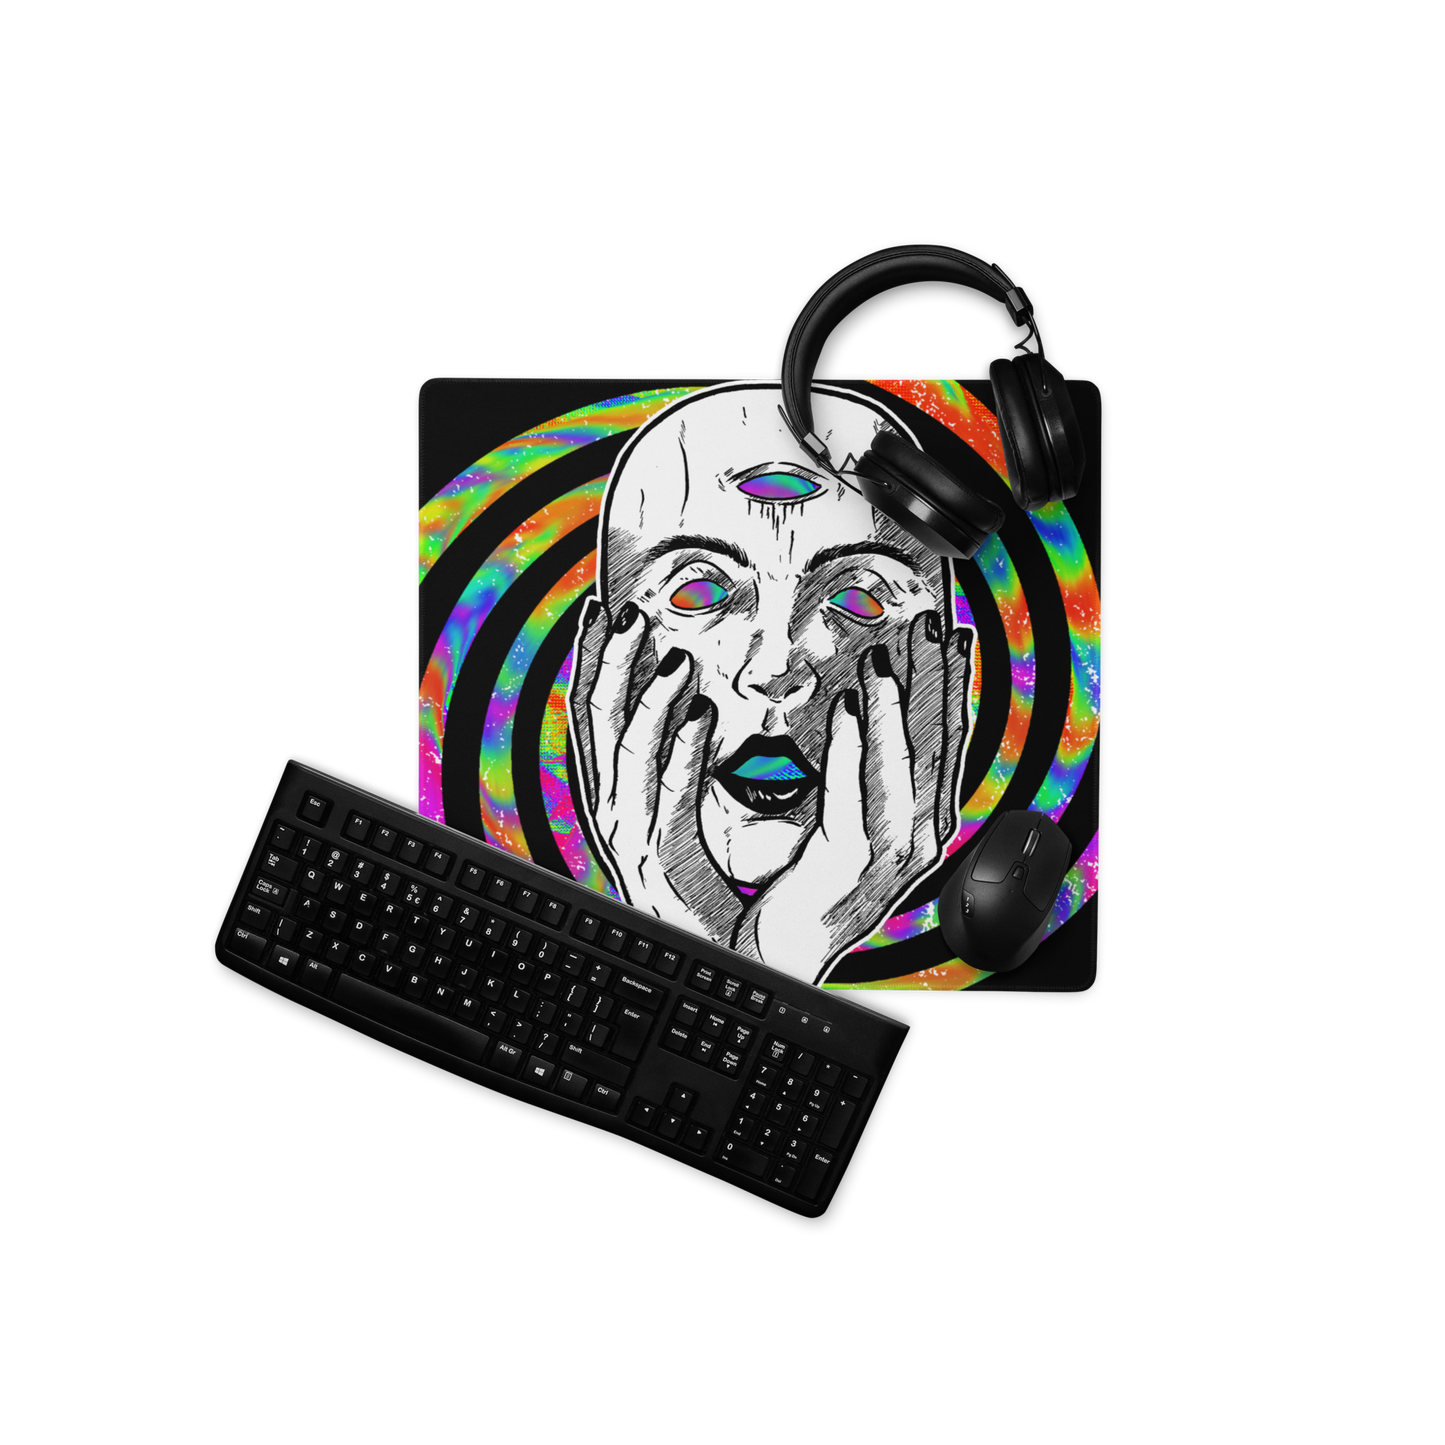 LSD TRIP by Tprbingo - Gaming mouse pad